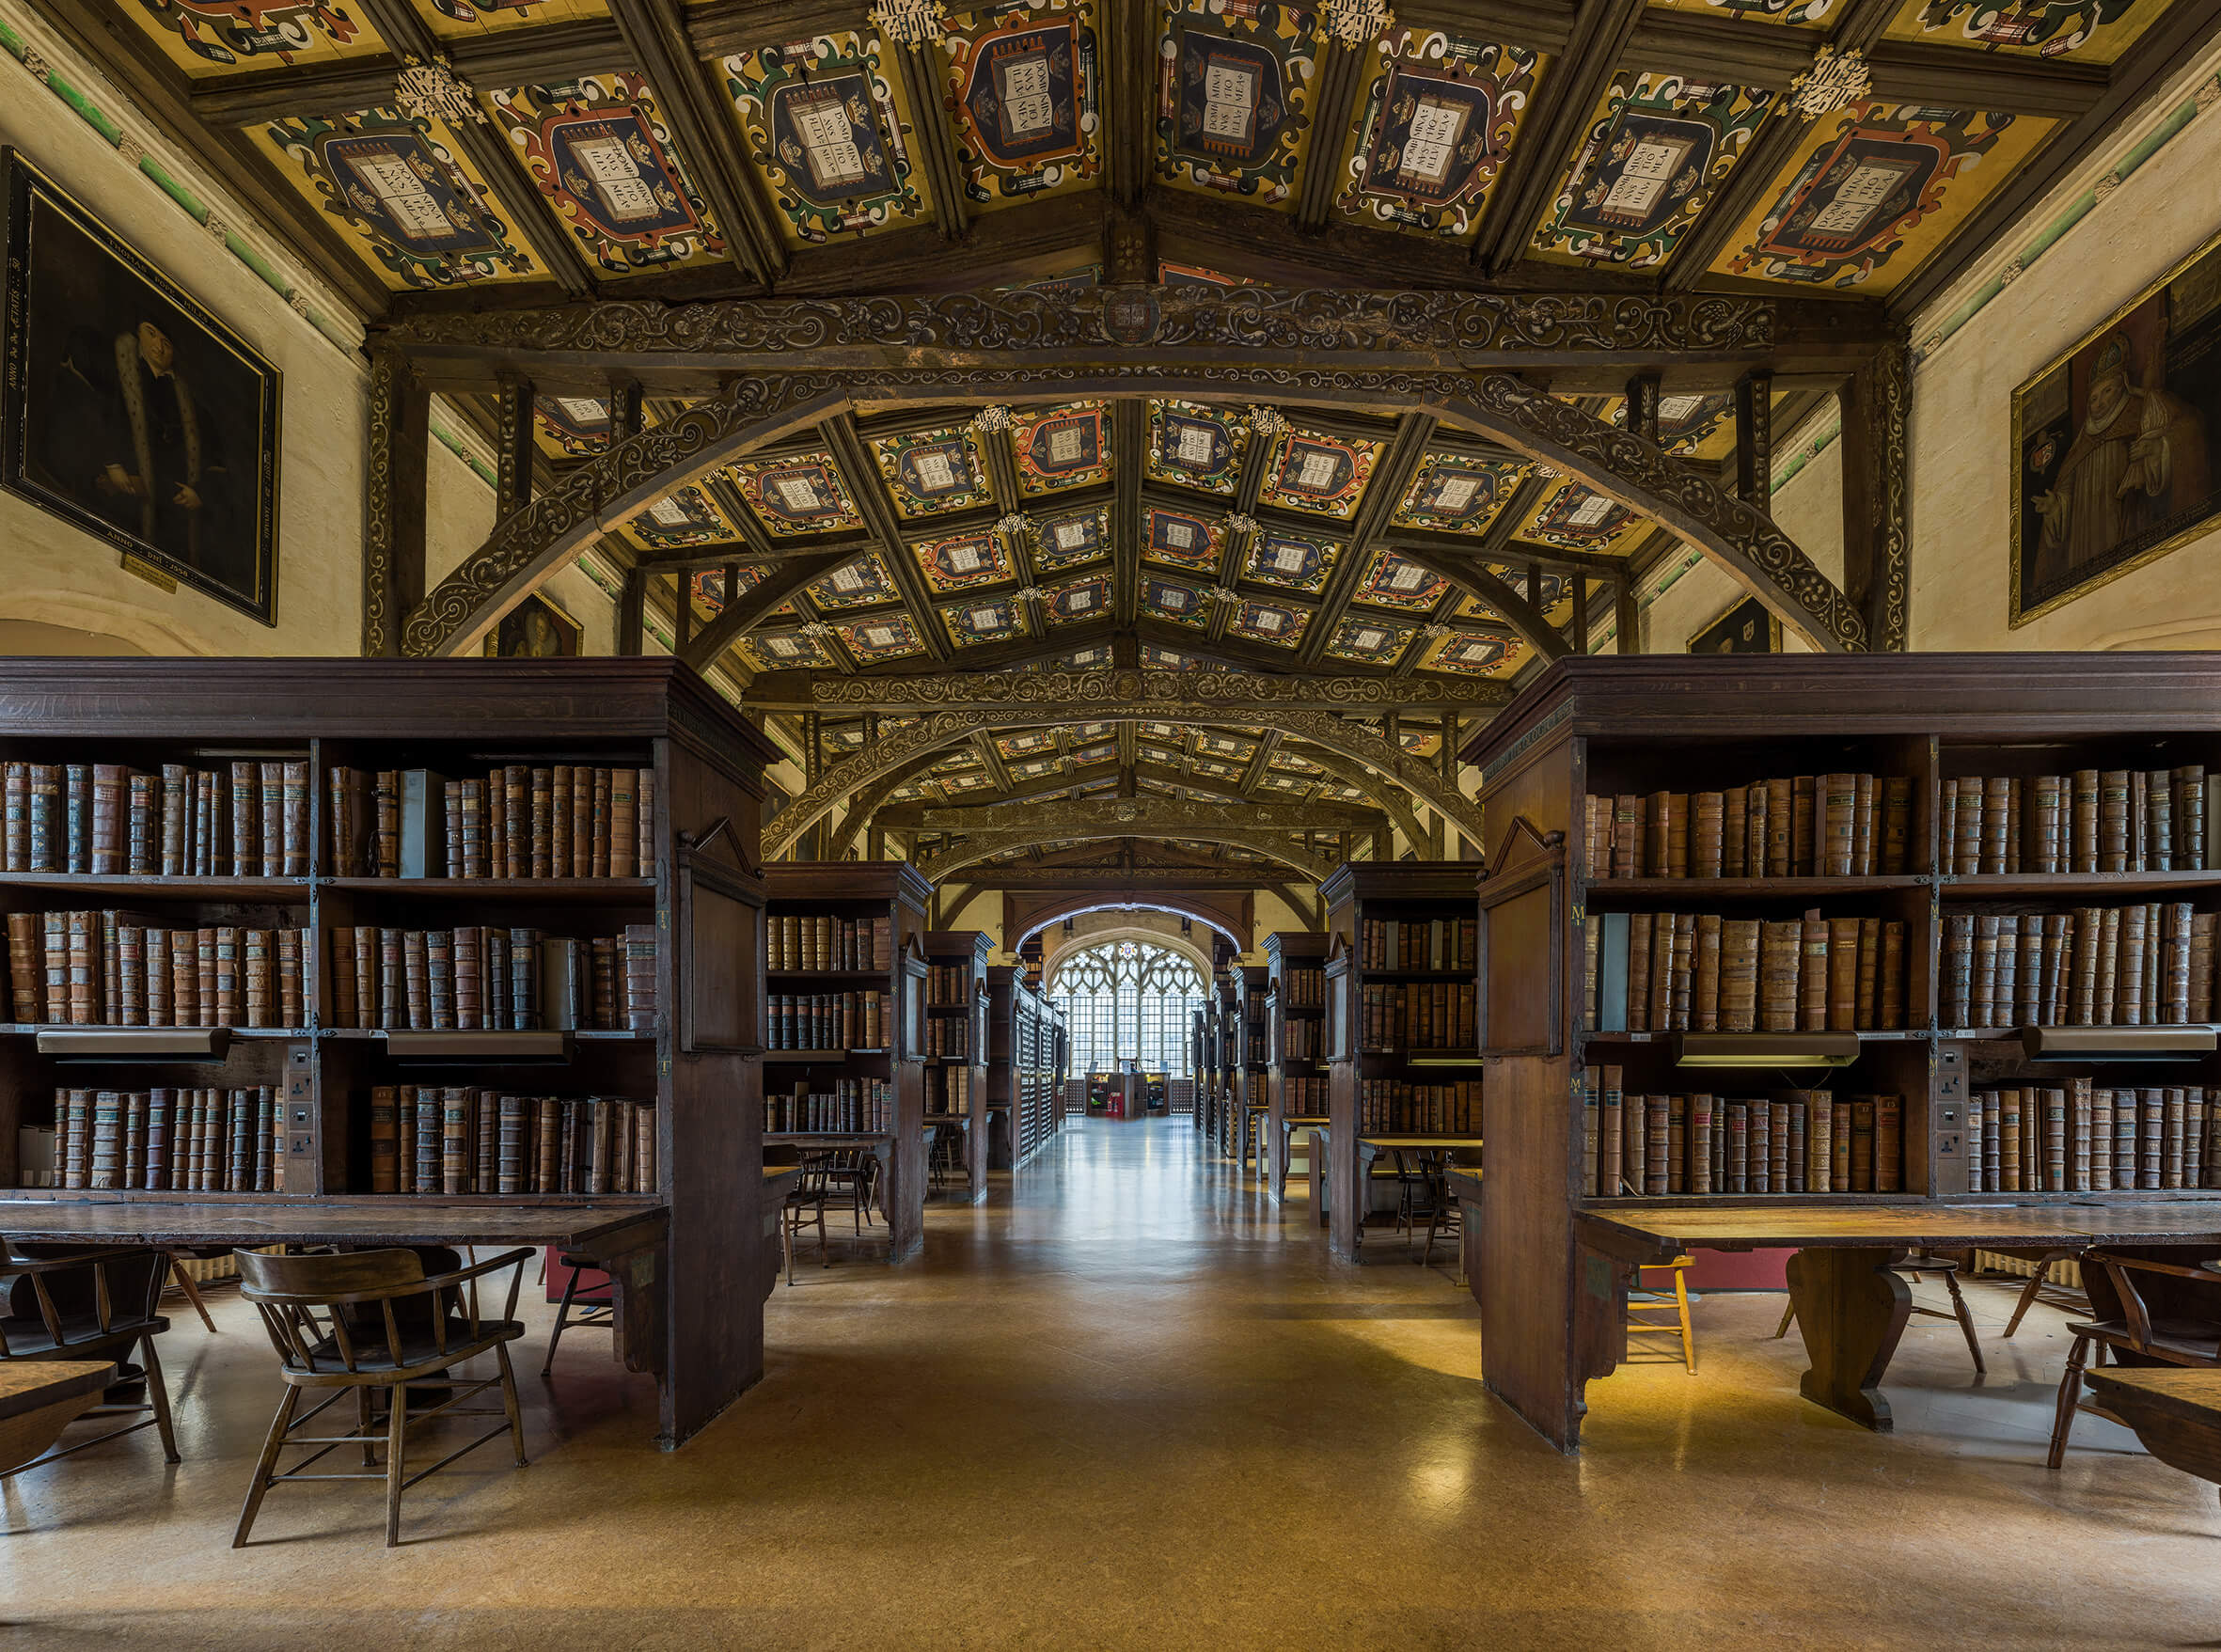 The Bodleian Library in Oxford, United Kingdom Most Beautiful Libraries Around The World